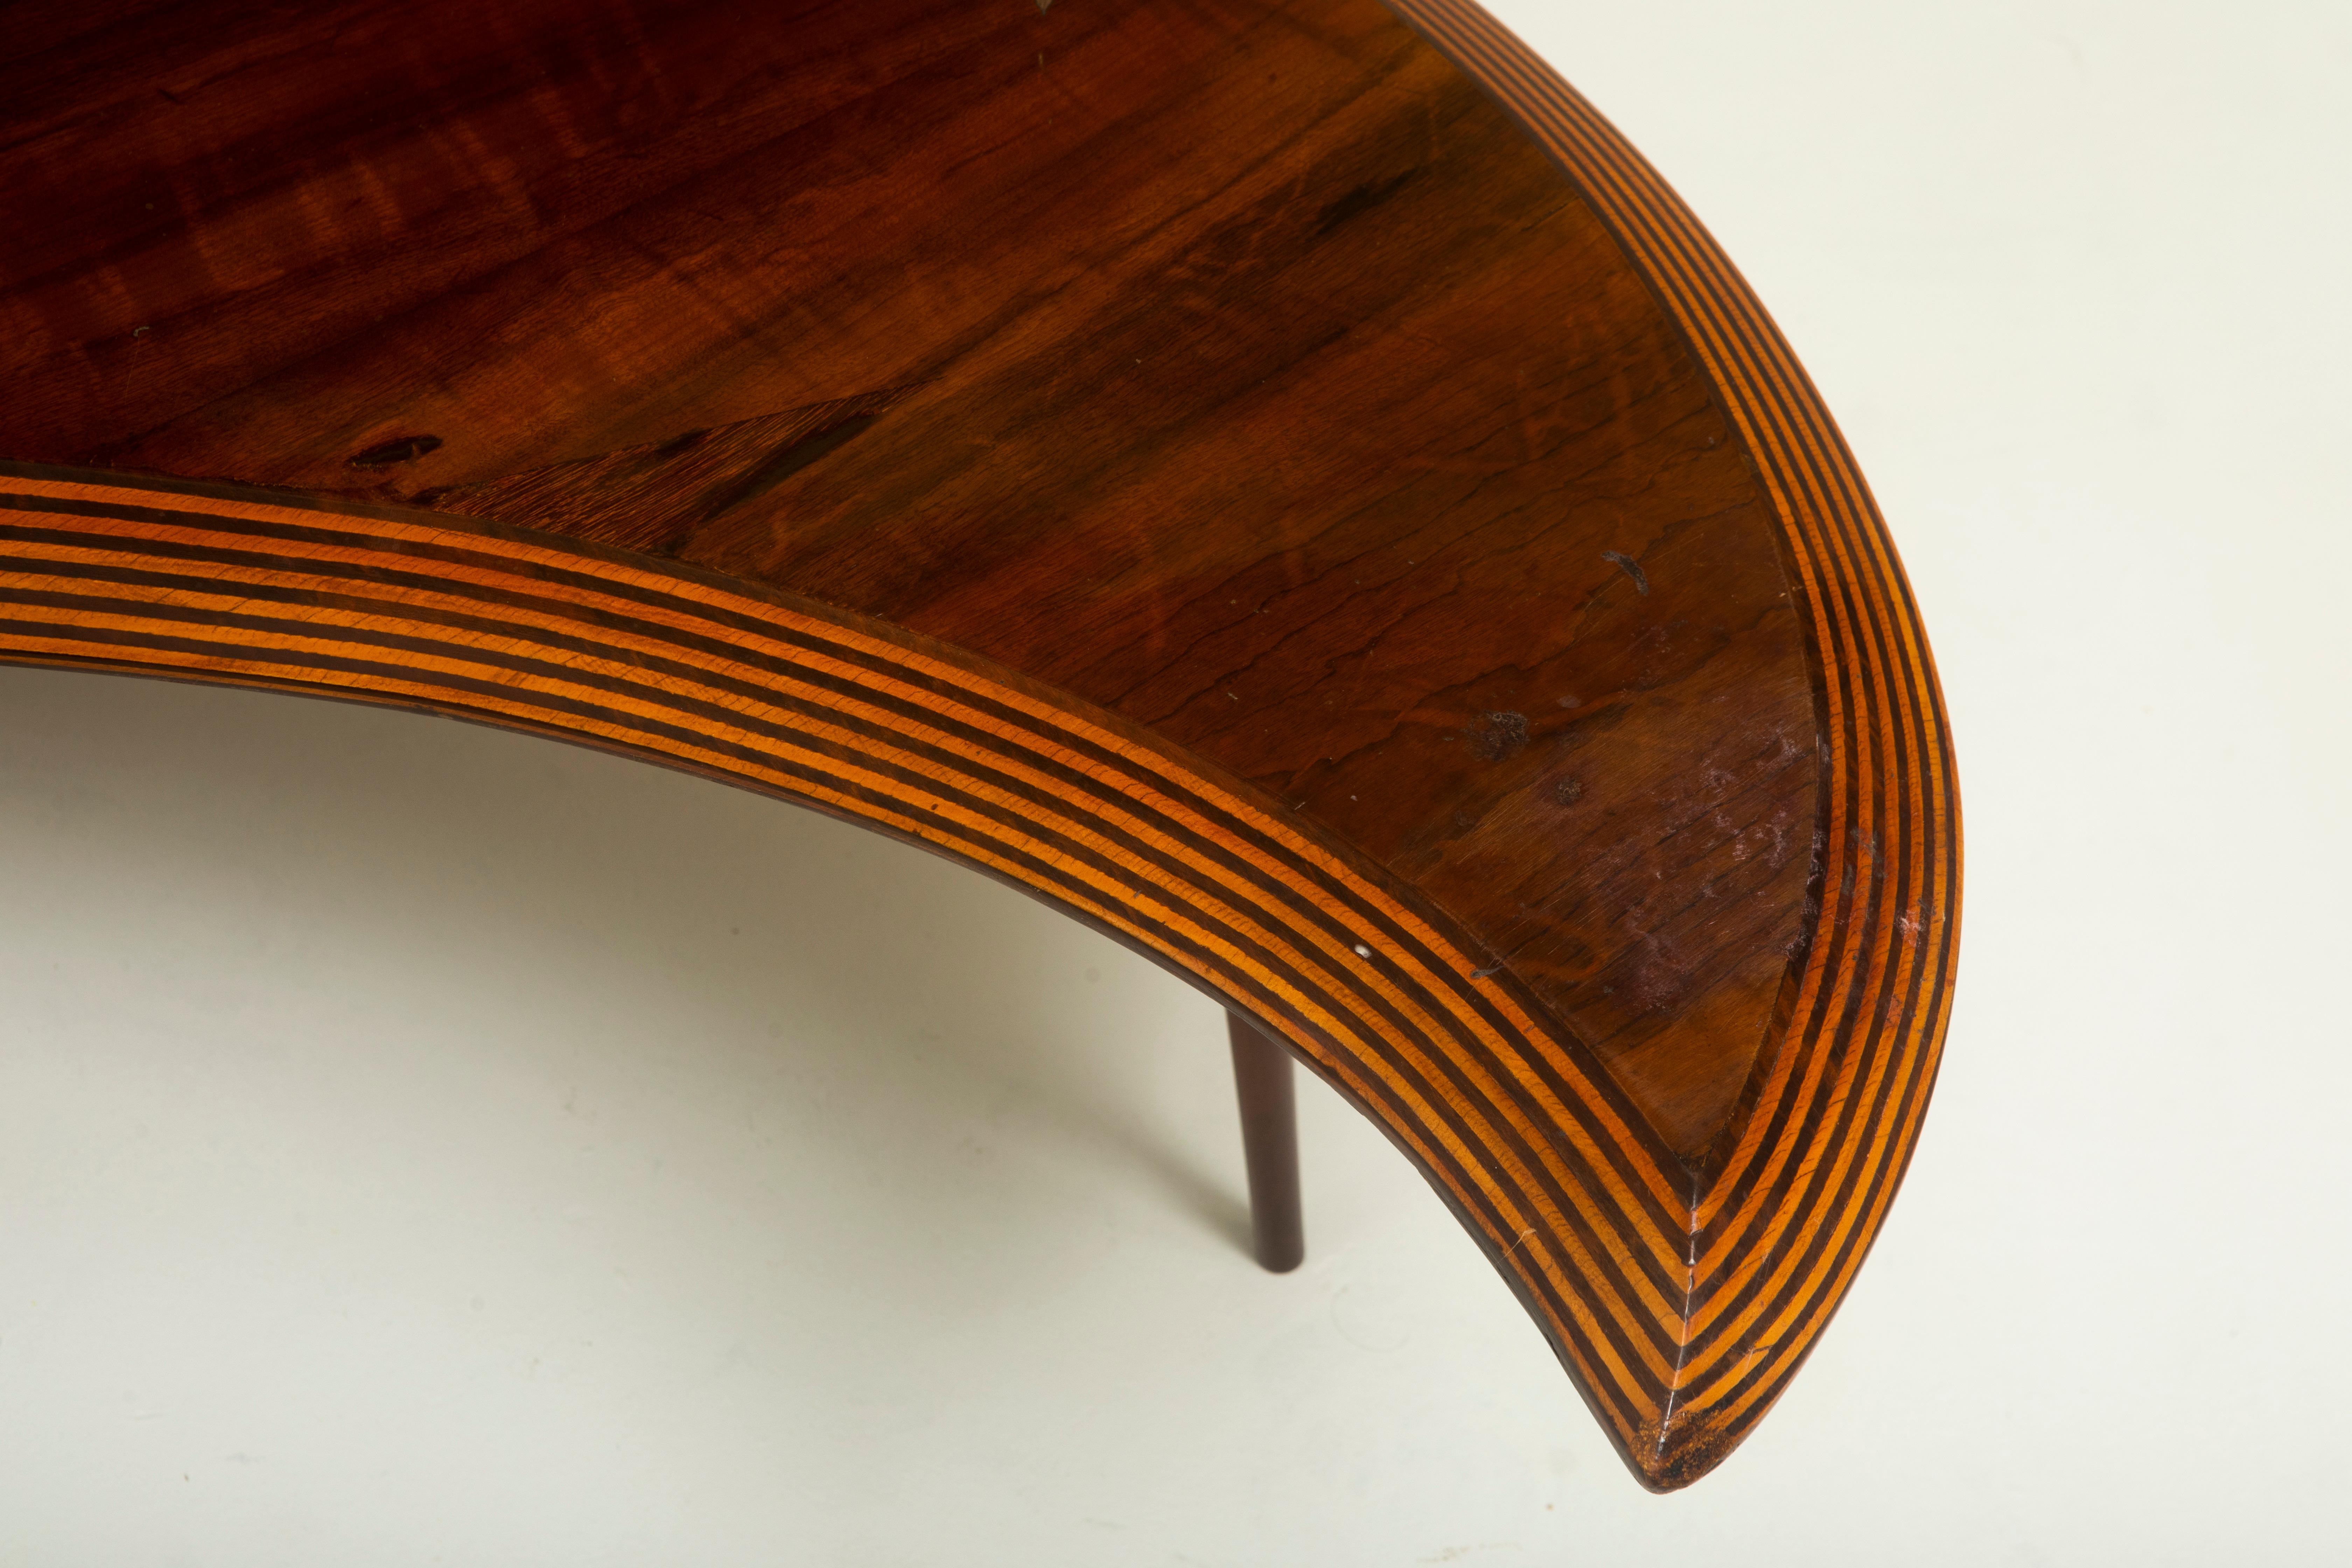 Varnished 'Half Moon' Center Table by CIMO Studio, Brazil, 1950s For Sale